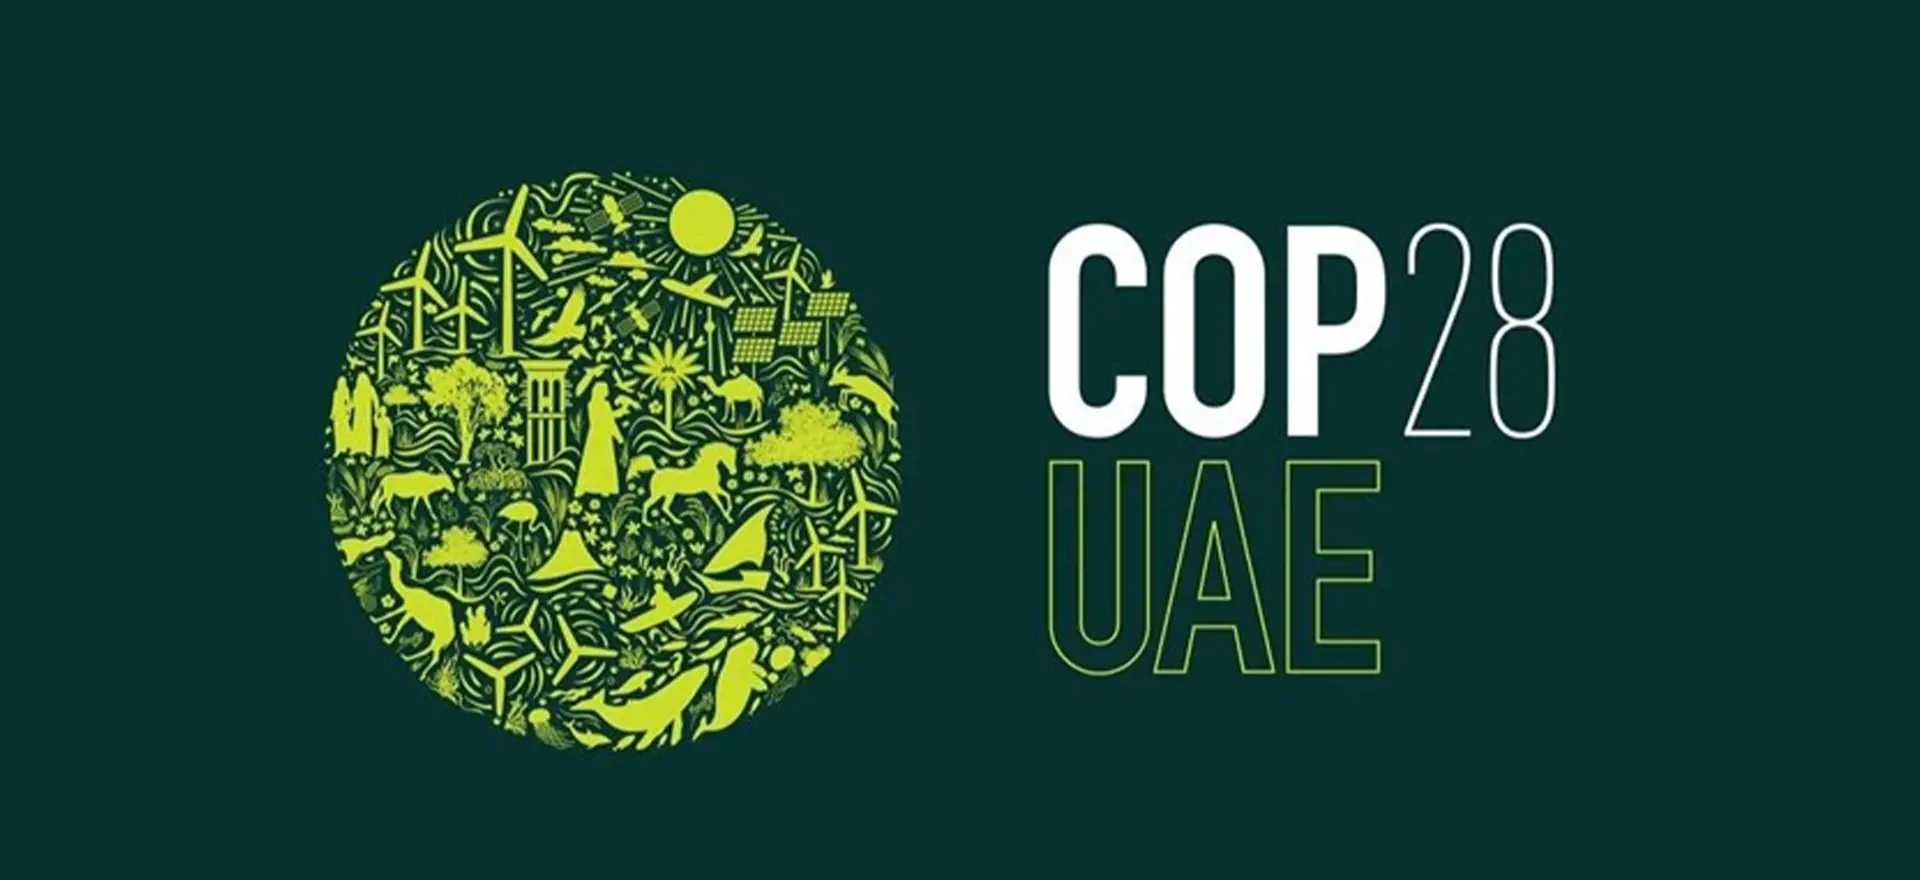 COP28 – what is really going on in Dubai?